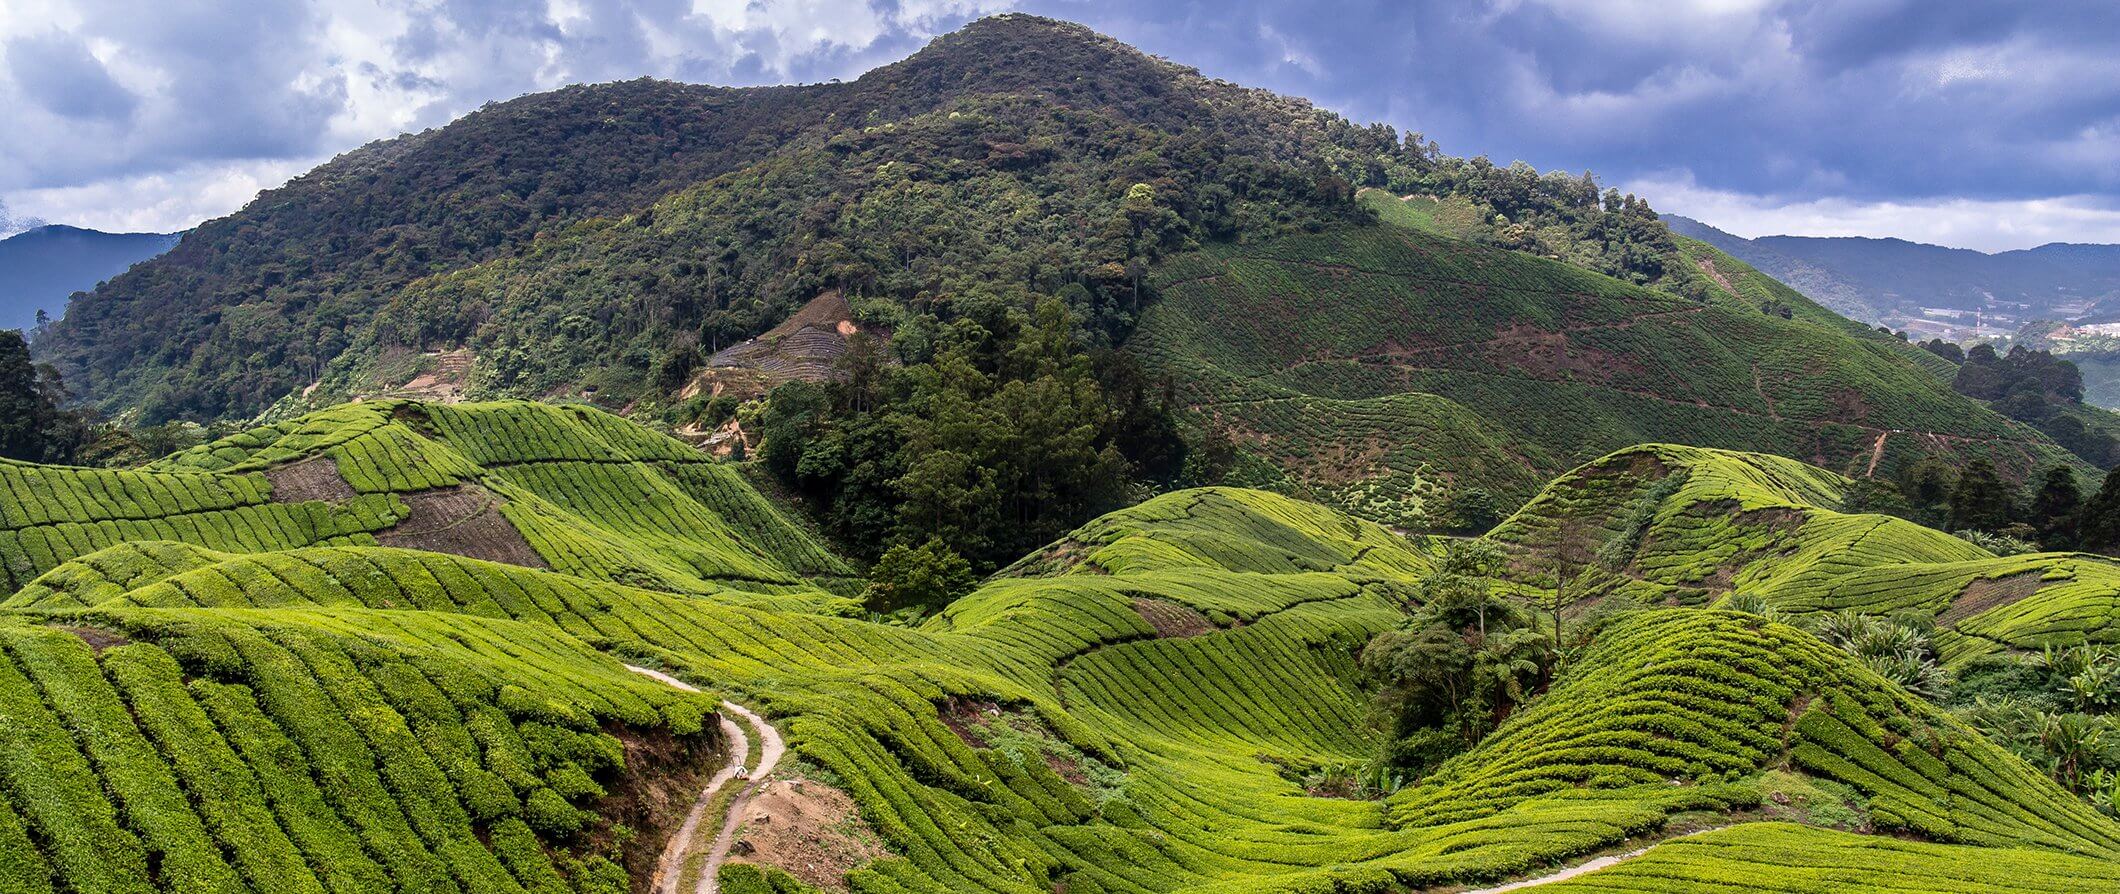 essay about holiday destination at cameron highlands